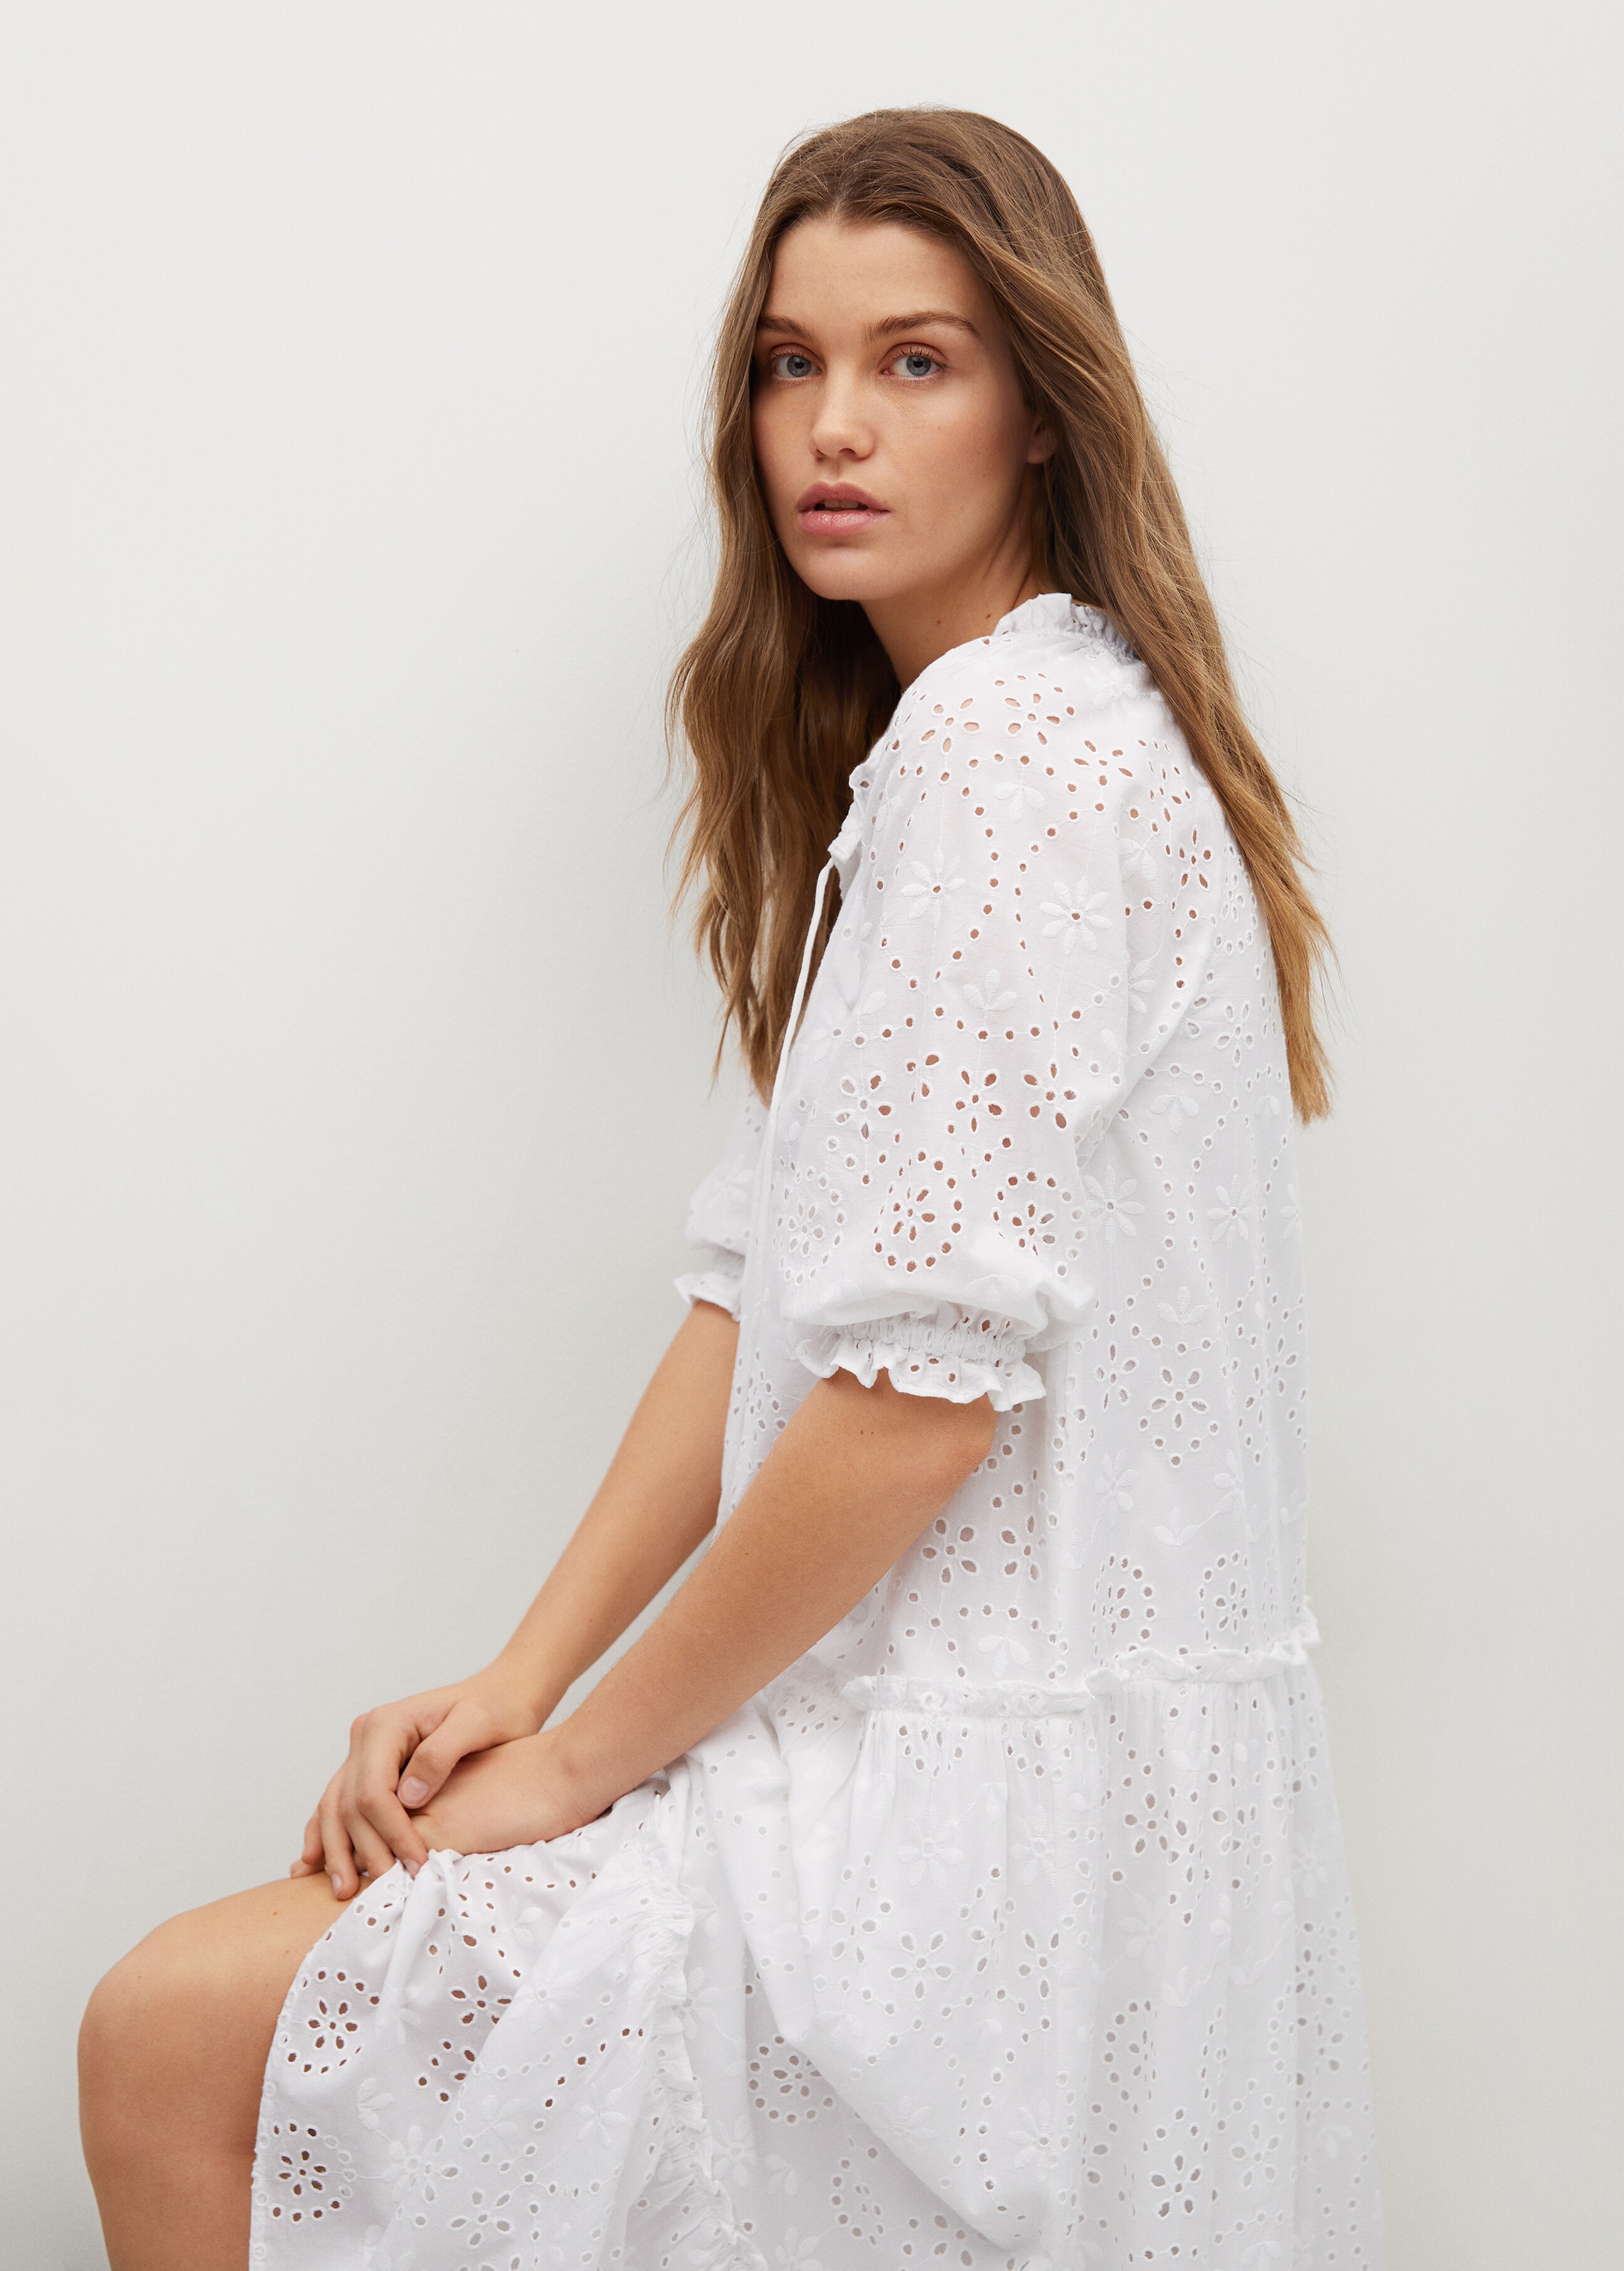 Broderie anglaise cotton dress - Details of the article 3